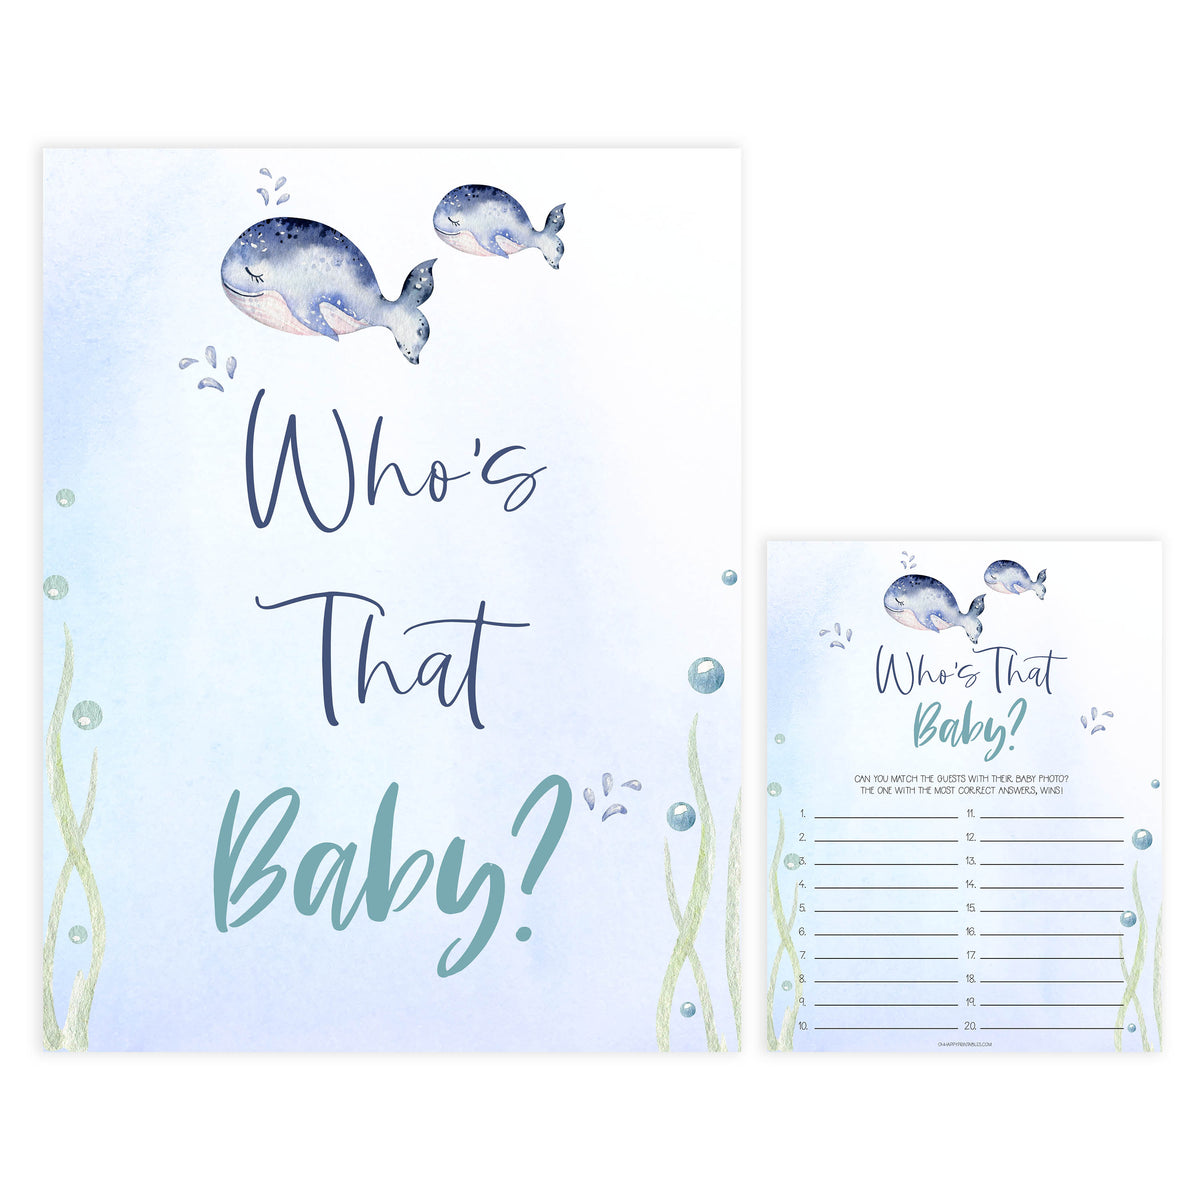 whos that baby game, Printable baby shower games, whale baby games, baby shower games, fun baby shower ideas, top baby shower ideas, whale baby shower, baby shower games, fun whale baby shower ideas